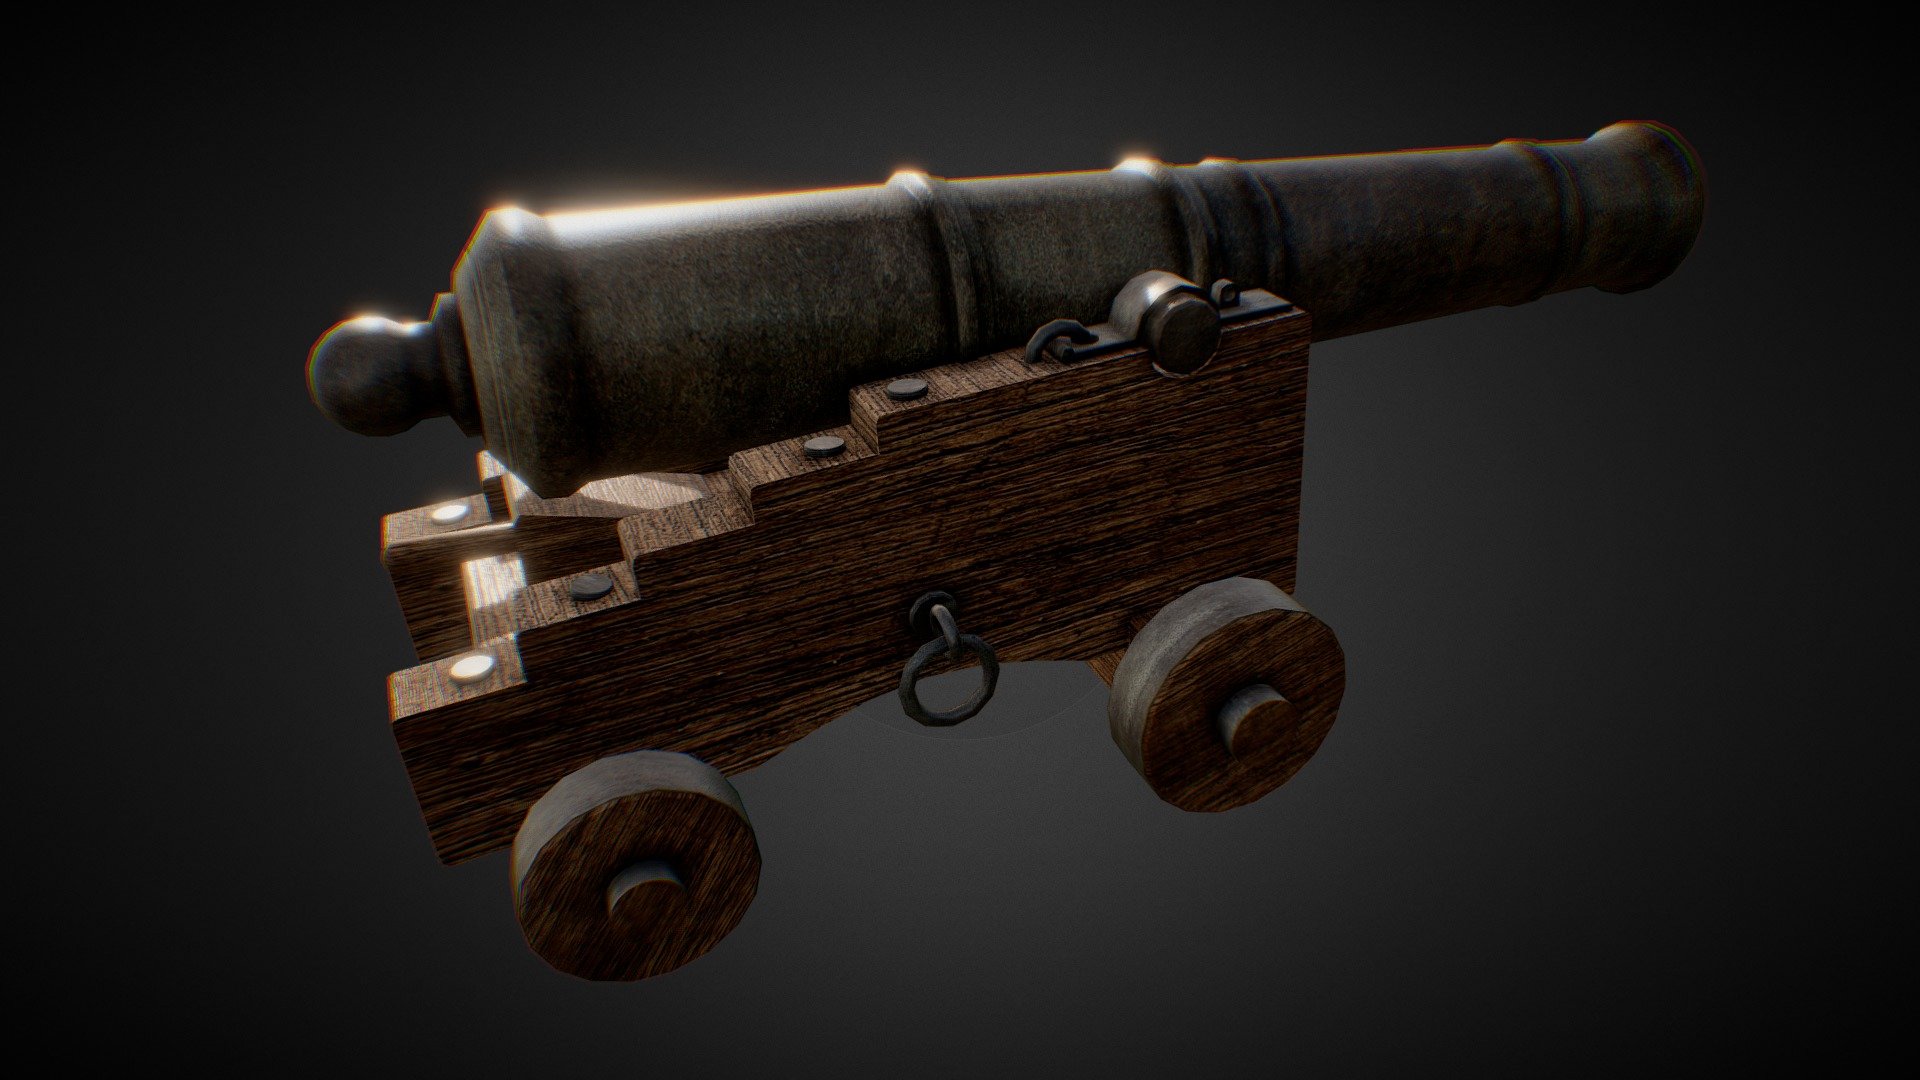 This is an old 24 lb. cannon found on a Spanish Galleon in the late 1600's. Modeled in Autodesk Maya and textured using Adobe Photoshop 3d model